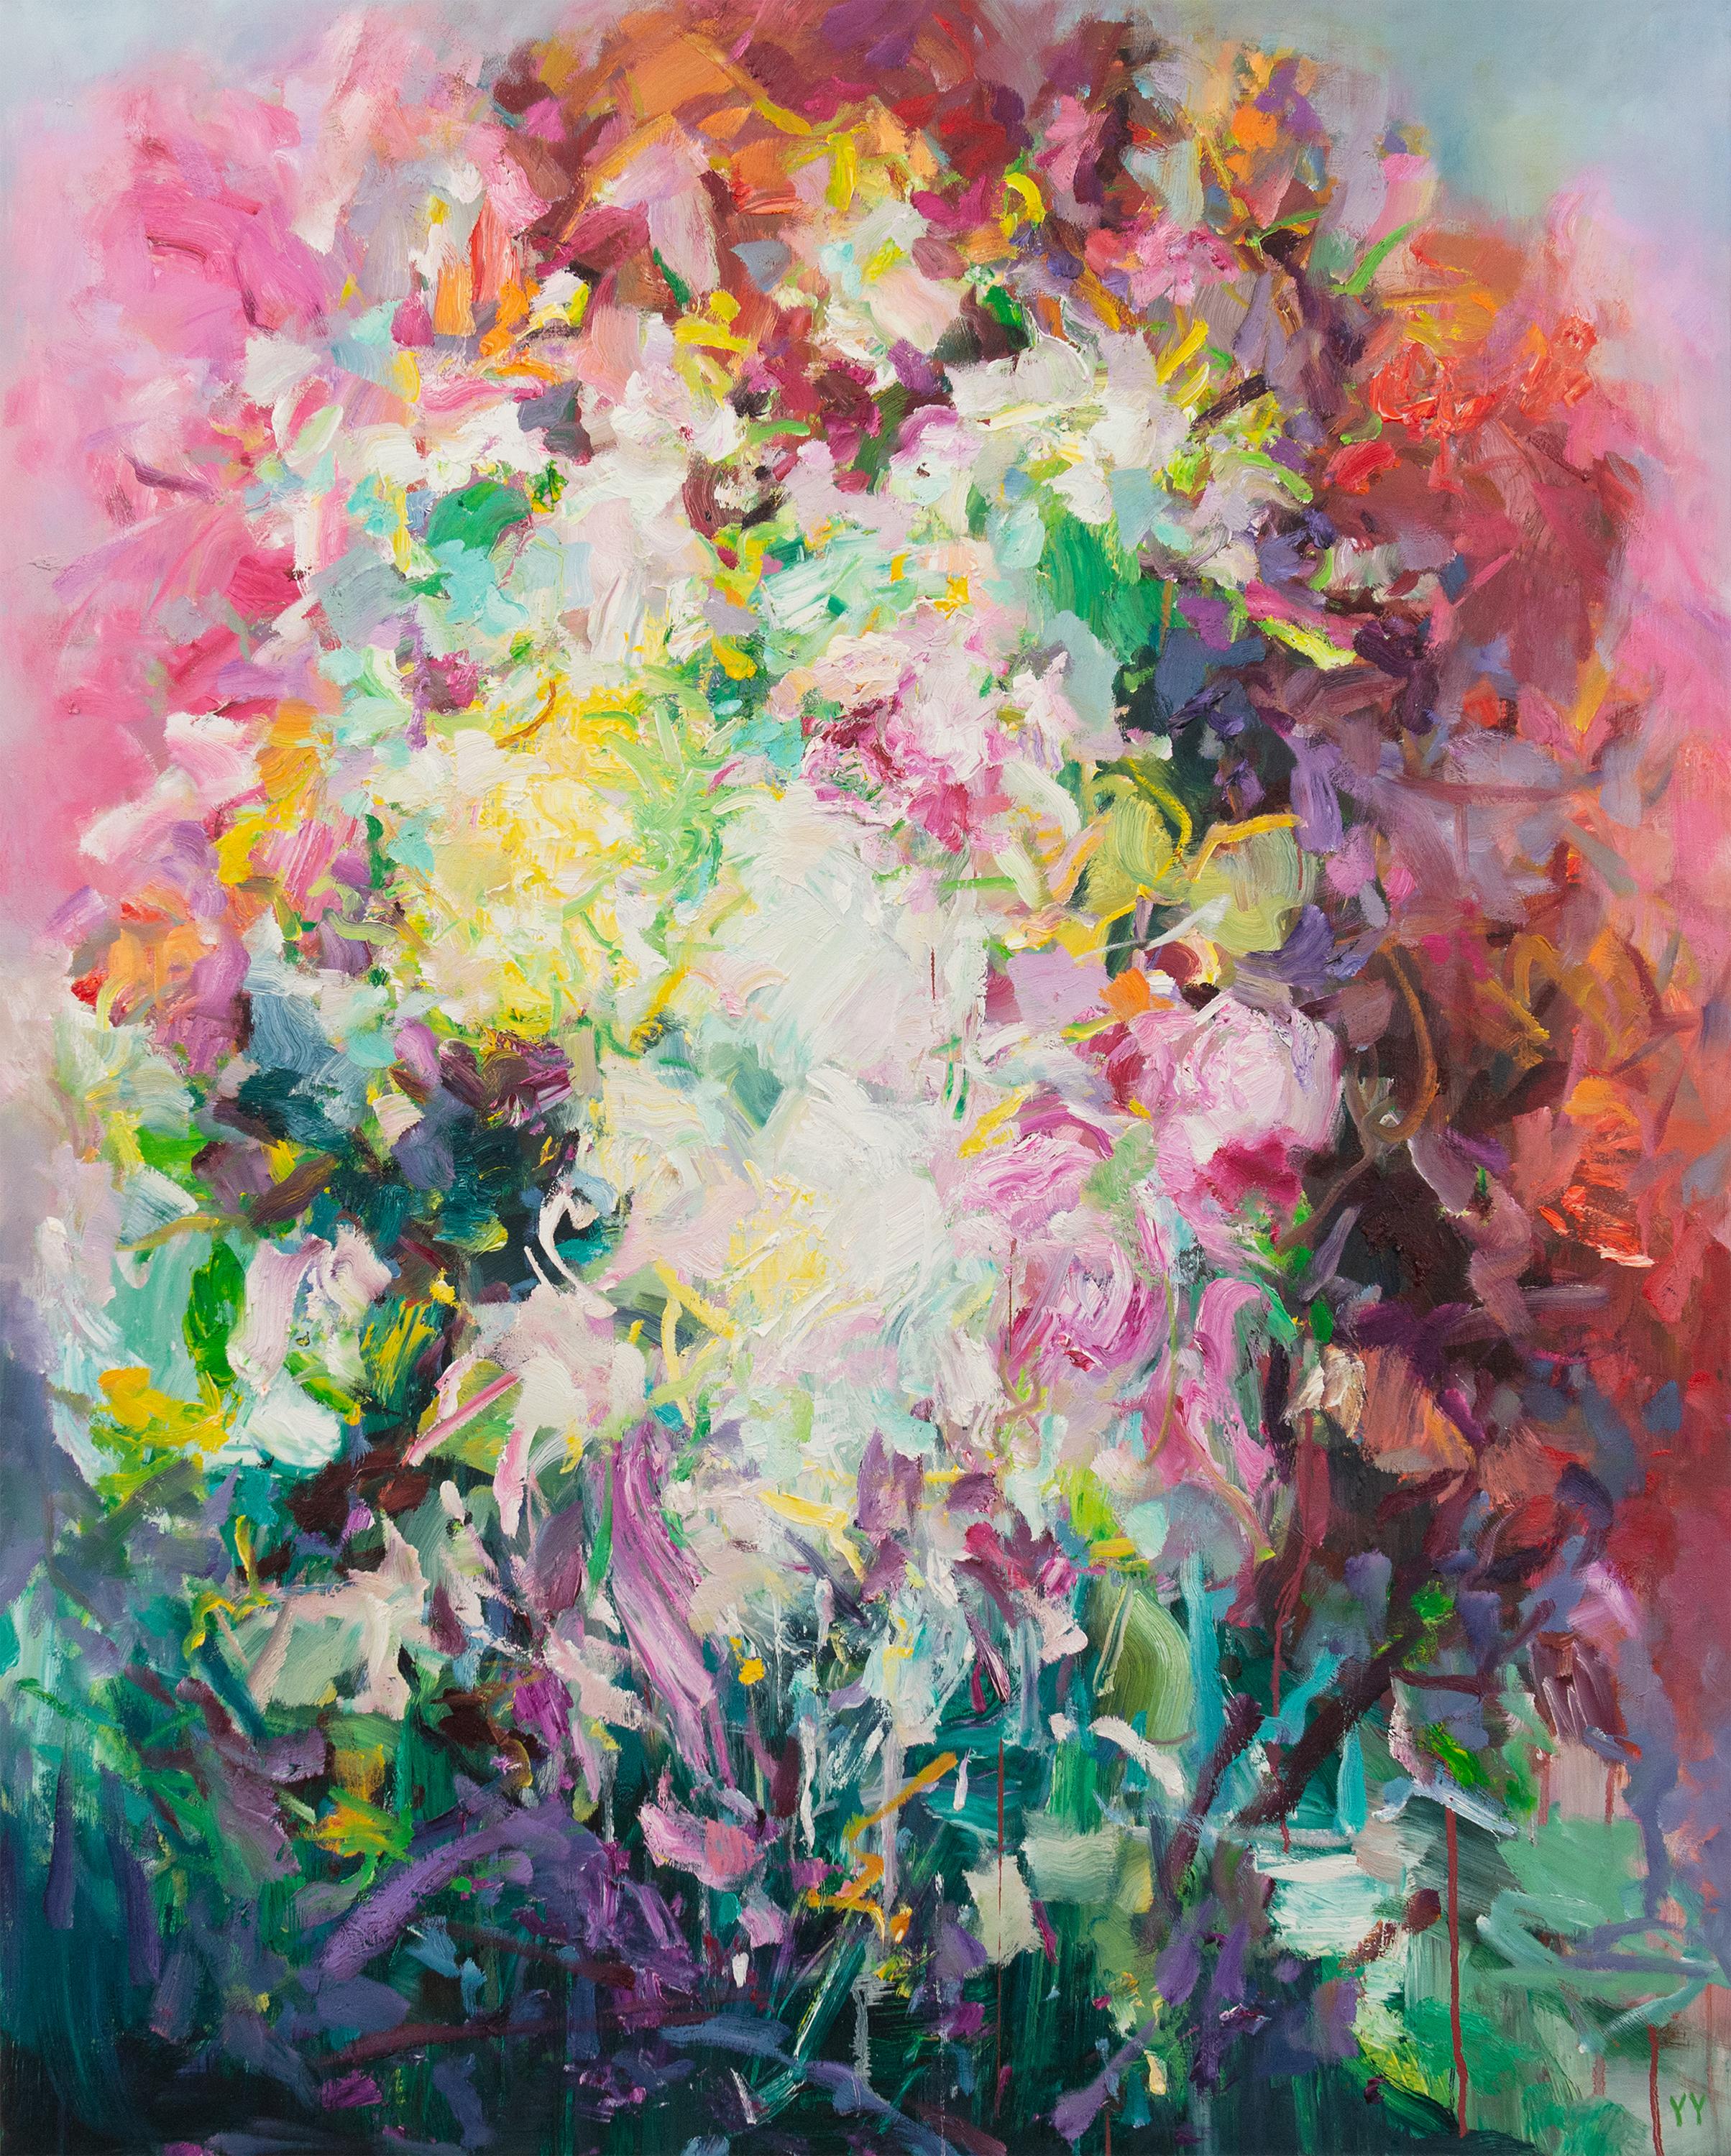 'Blooming Spirit' 2022 by Chinese/Canadian artist Yangyang Pan. Oil on canvas, 60 x 48 in. / Frame: 61 x 49 in.  This beautiful abstract-expressionistic, landscape painting incorporates gestural brushstrokes resembling a floral garden in pastel